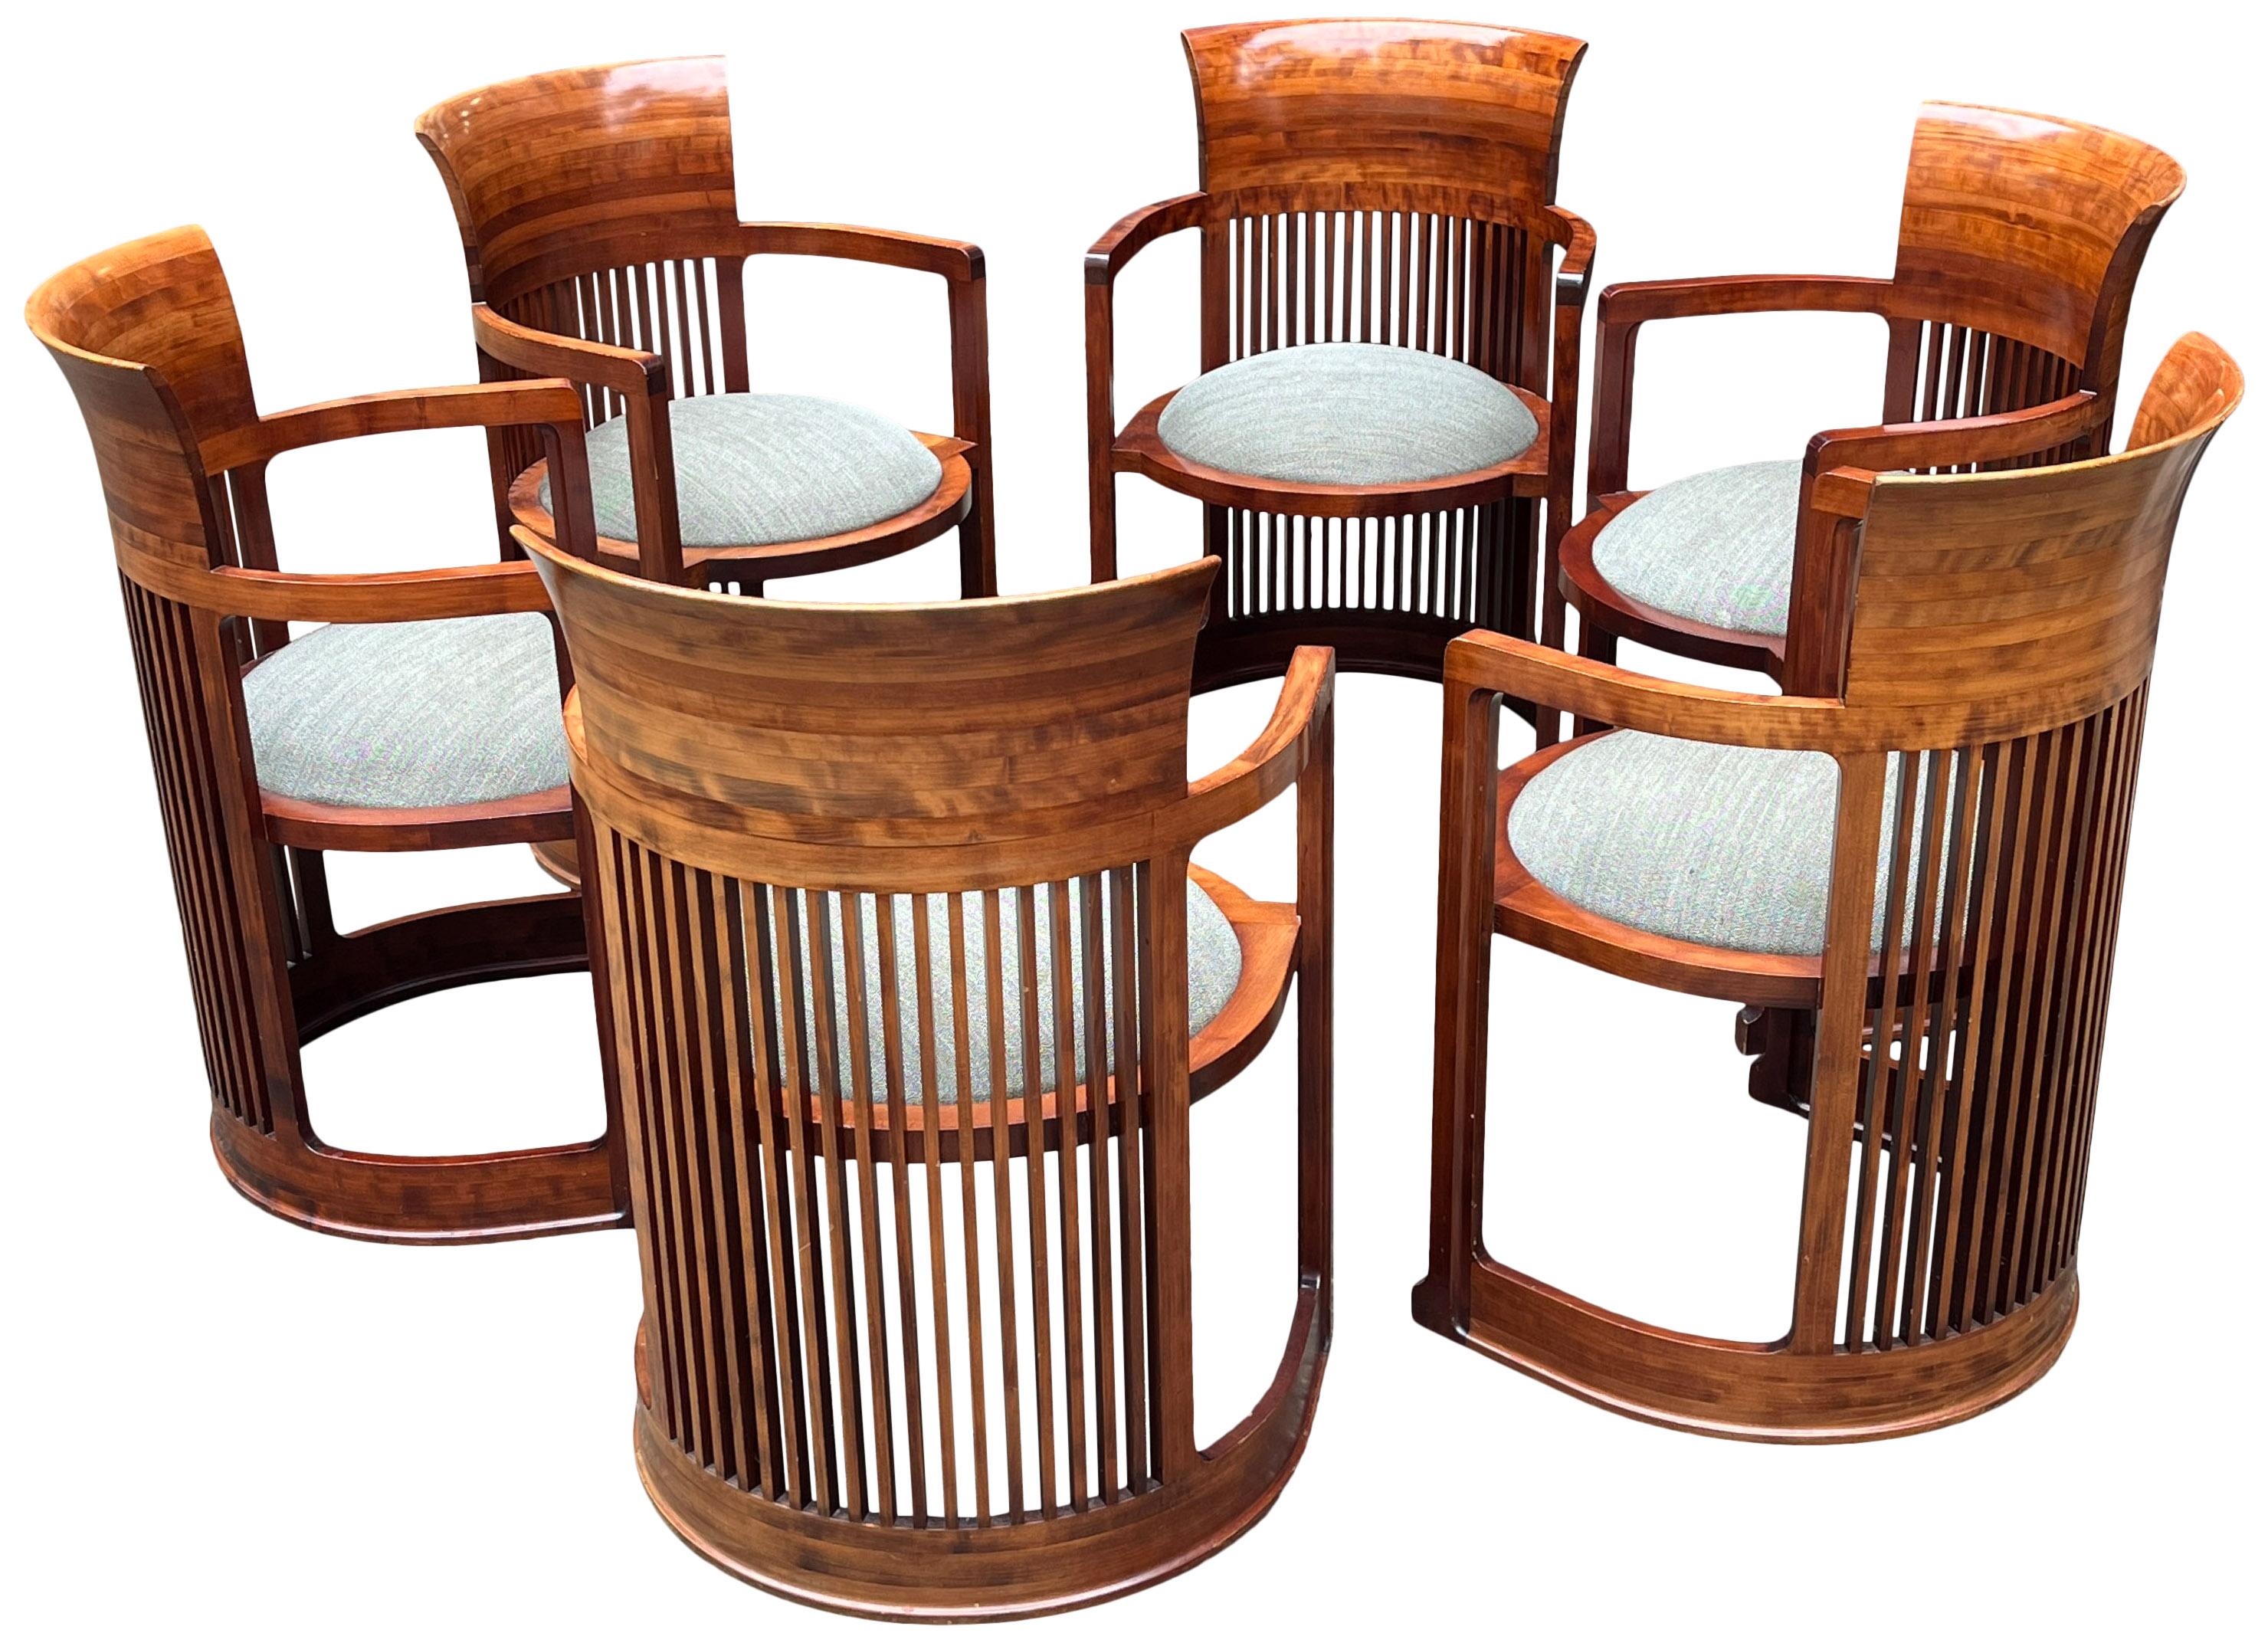 Frank Lloyd Wright for Cassina, six 'barrel' chairs design 1937, production 1986, United States. This barrel-shaped armchair is composed of 37 parts, each fitting into the other with pinpoint precision. The base and the chair back are constructed